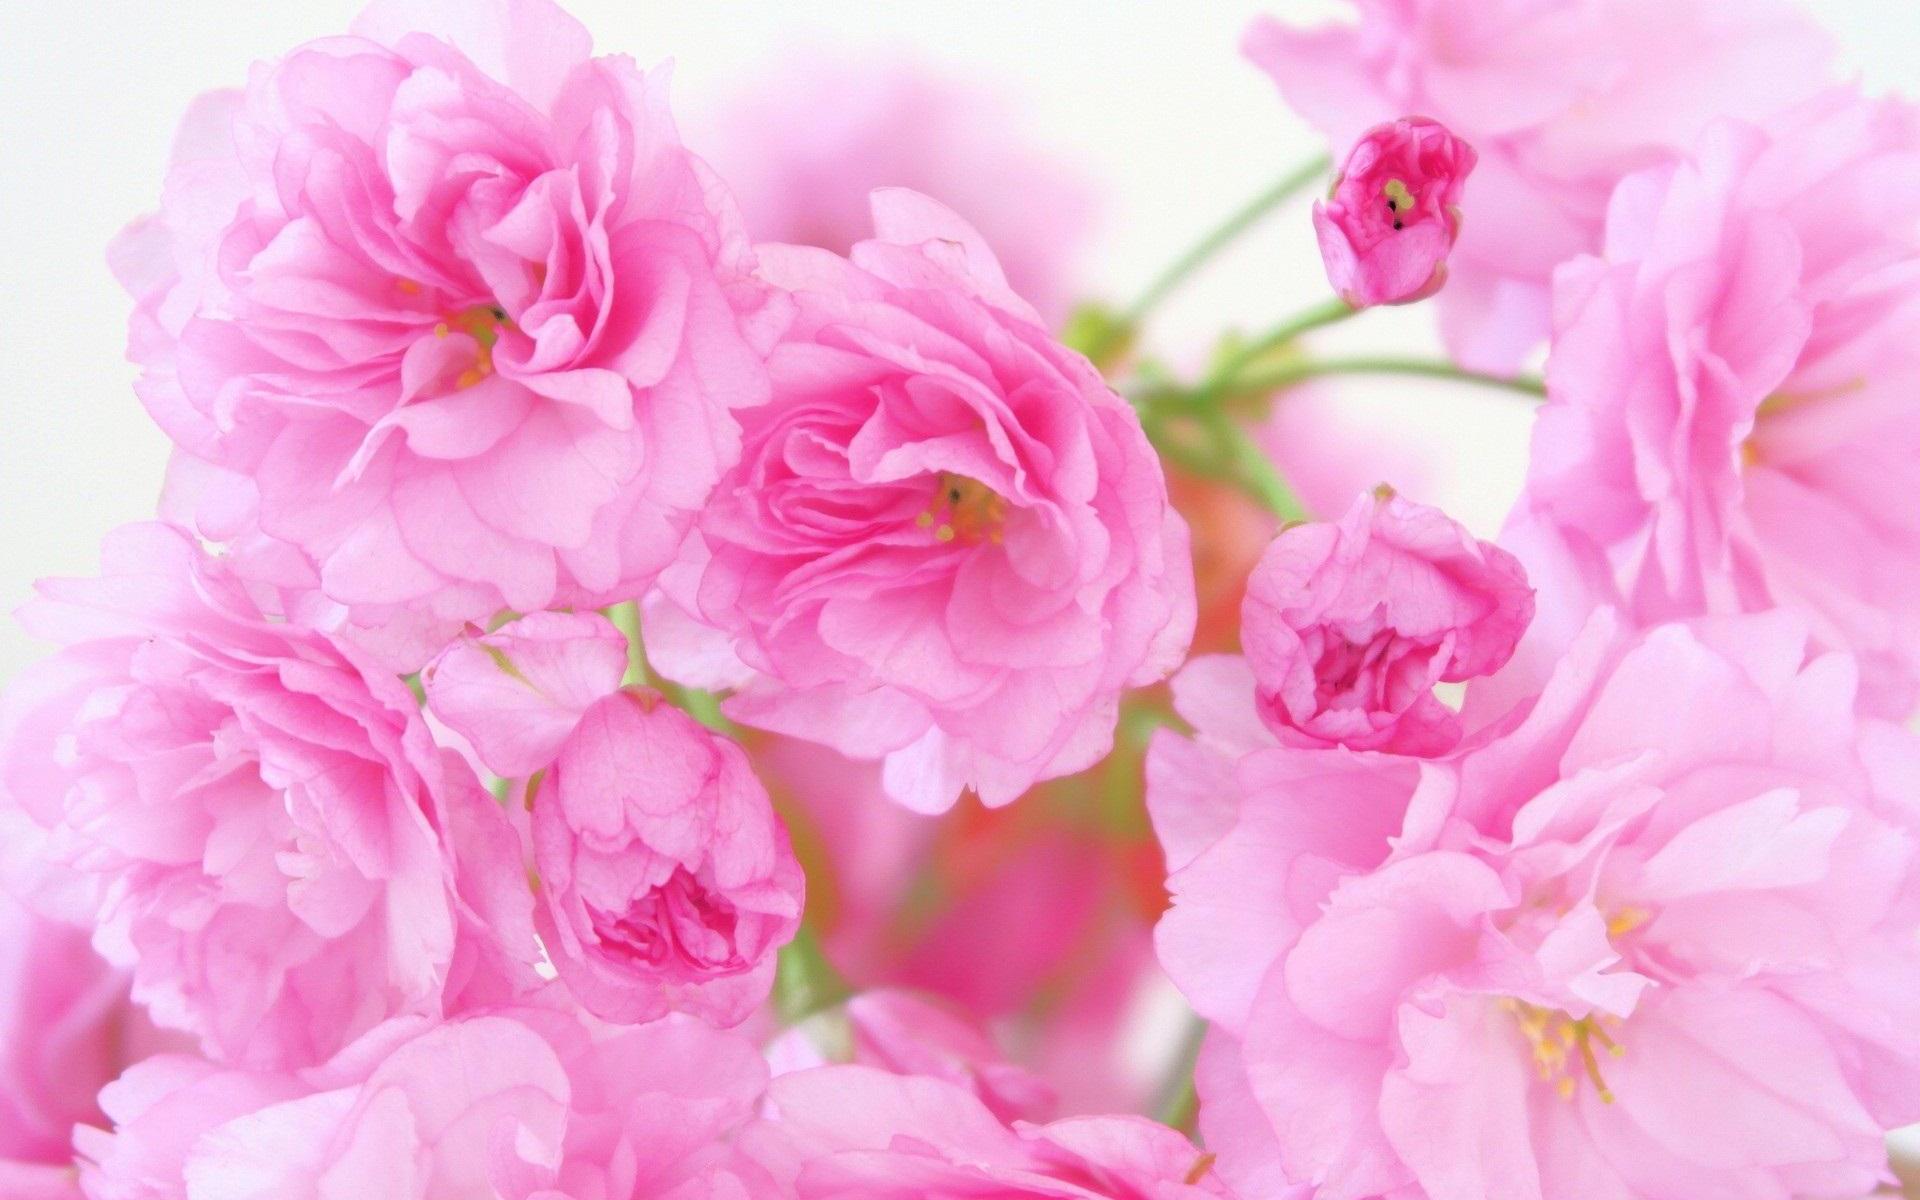 Best Pink Roses - Wallpaper, High Definition, High Quality ...